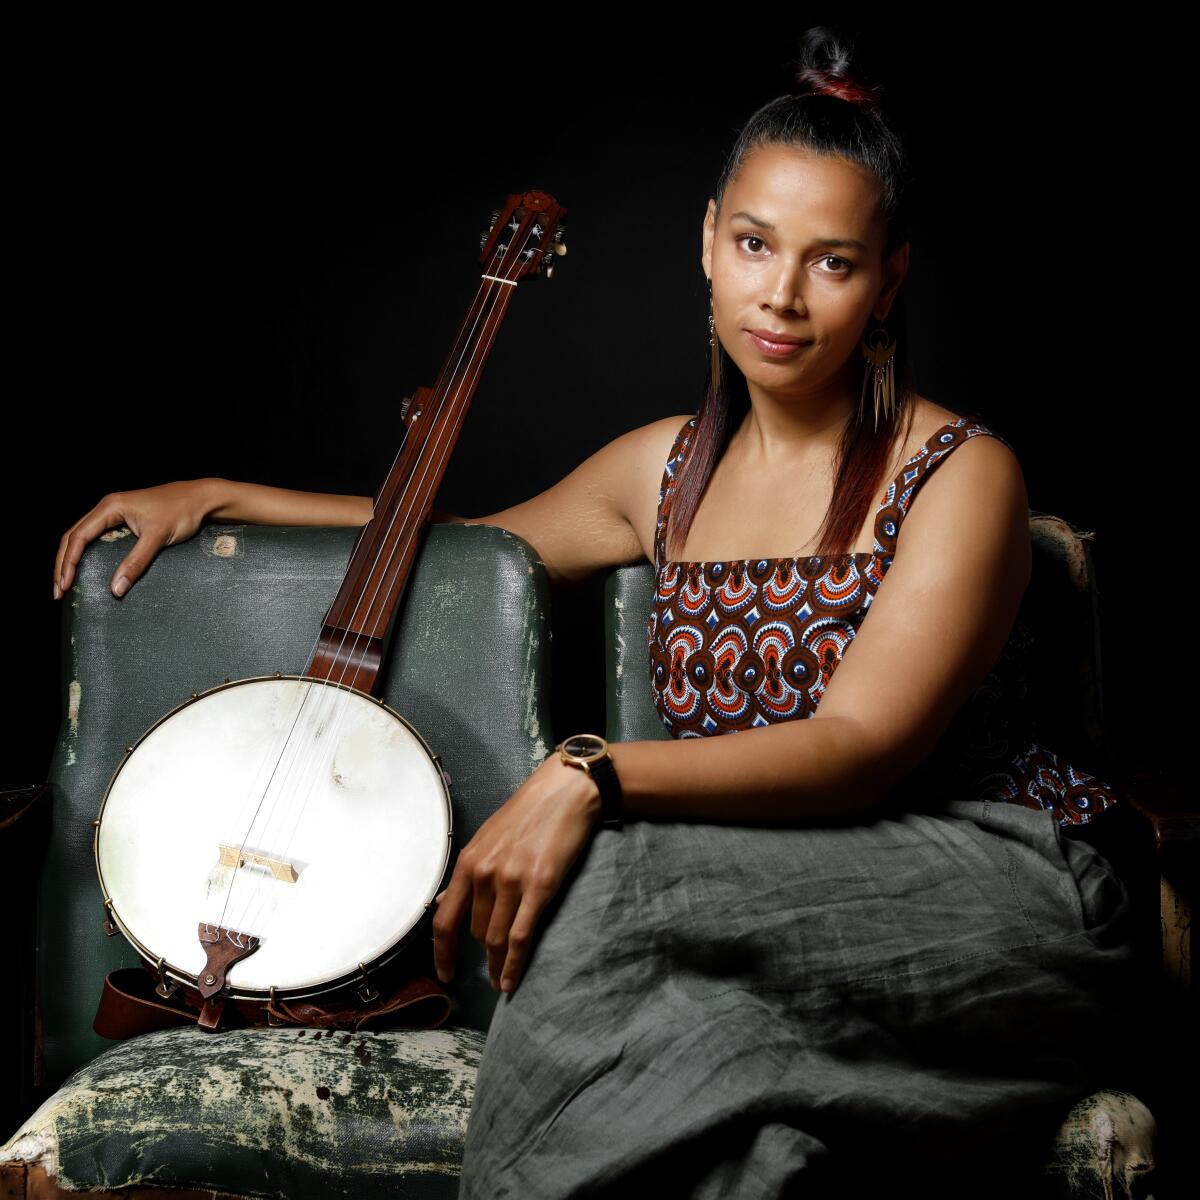 Rhiannon Giddens, wearing a brightly patterned top and grey pants, sits next to a banjo.